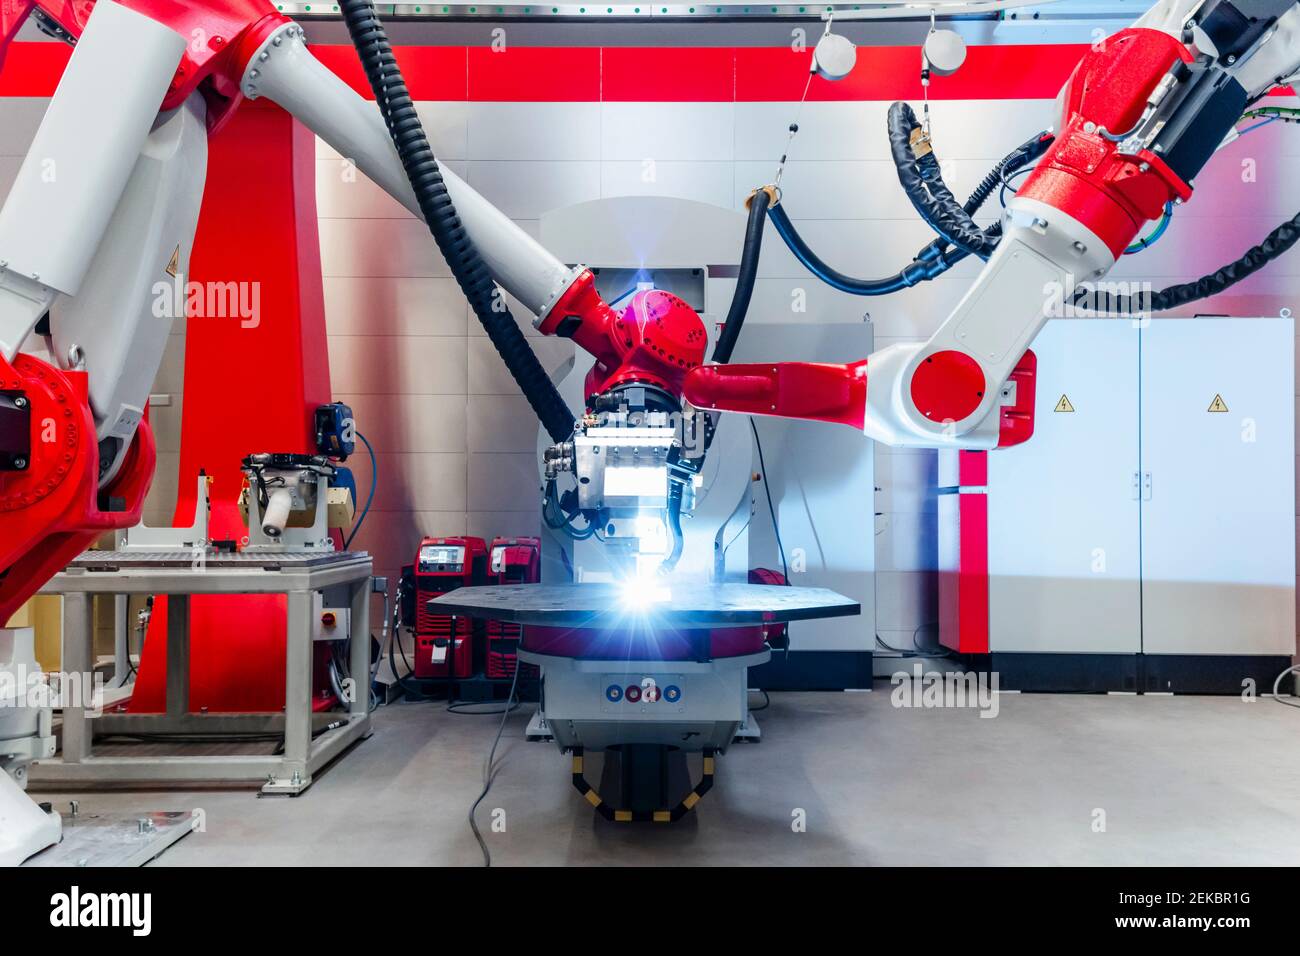 Automatic robots welding metal in factory Stock Photo